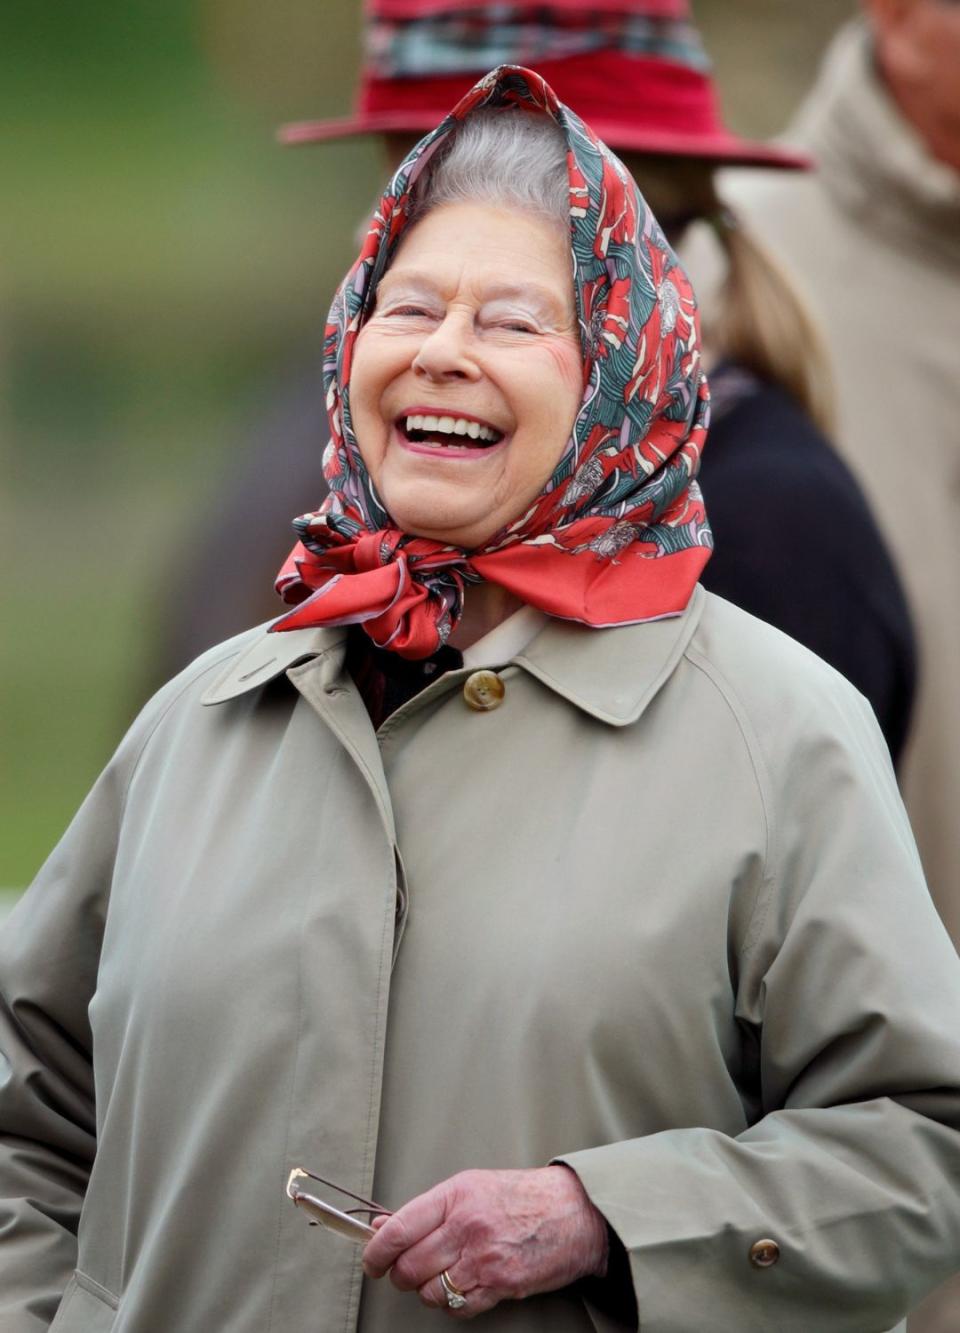 The late Queen showcasing her royal smile